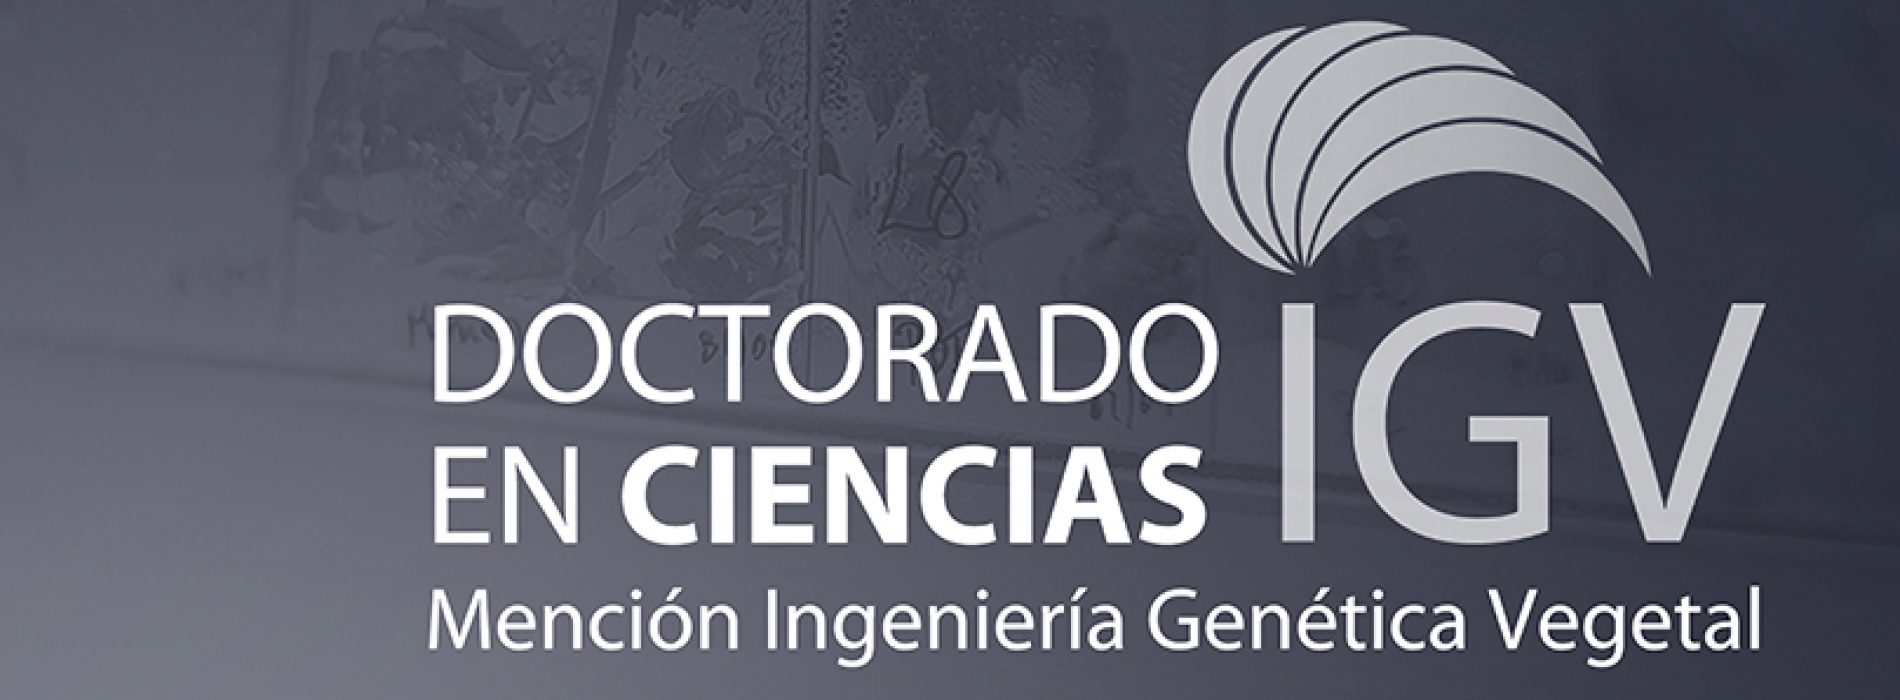 Application to the doctoral program at the University of Talca